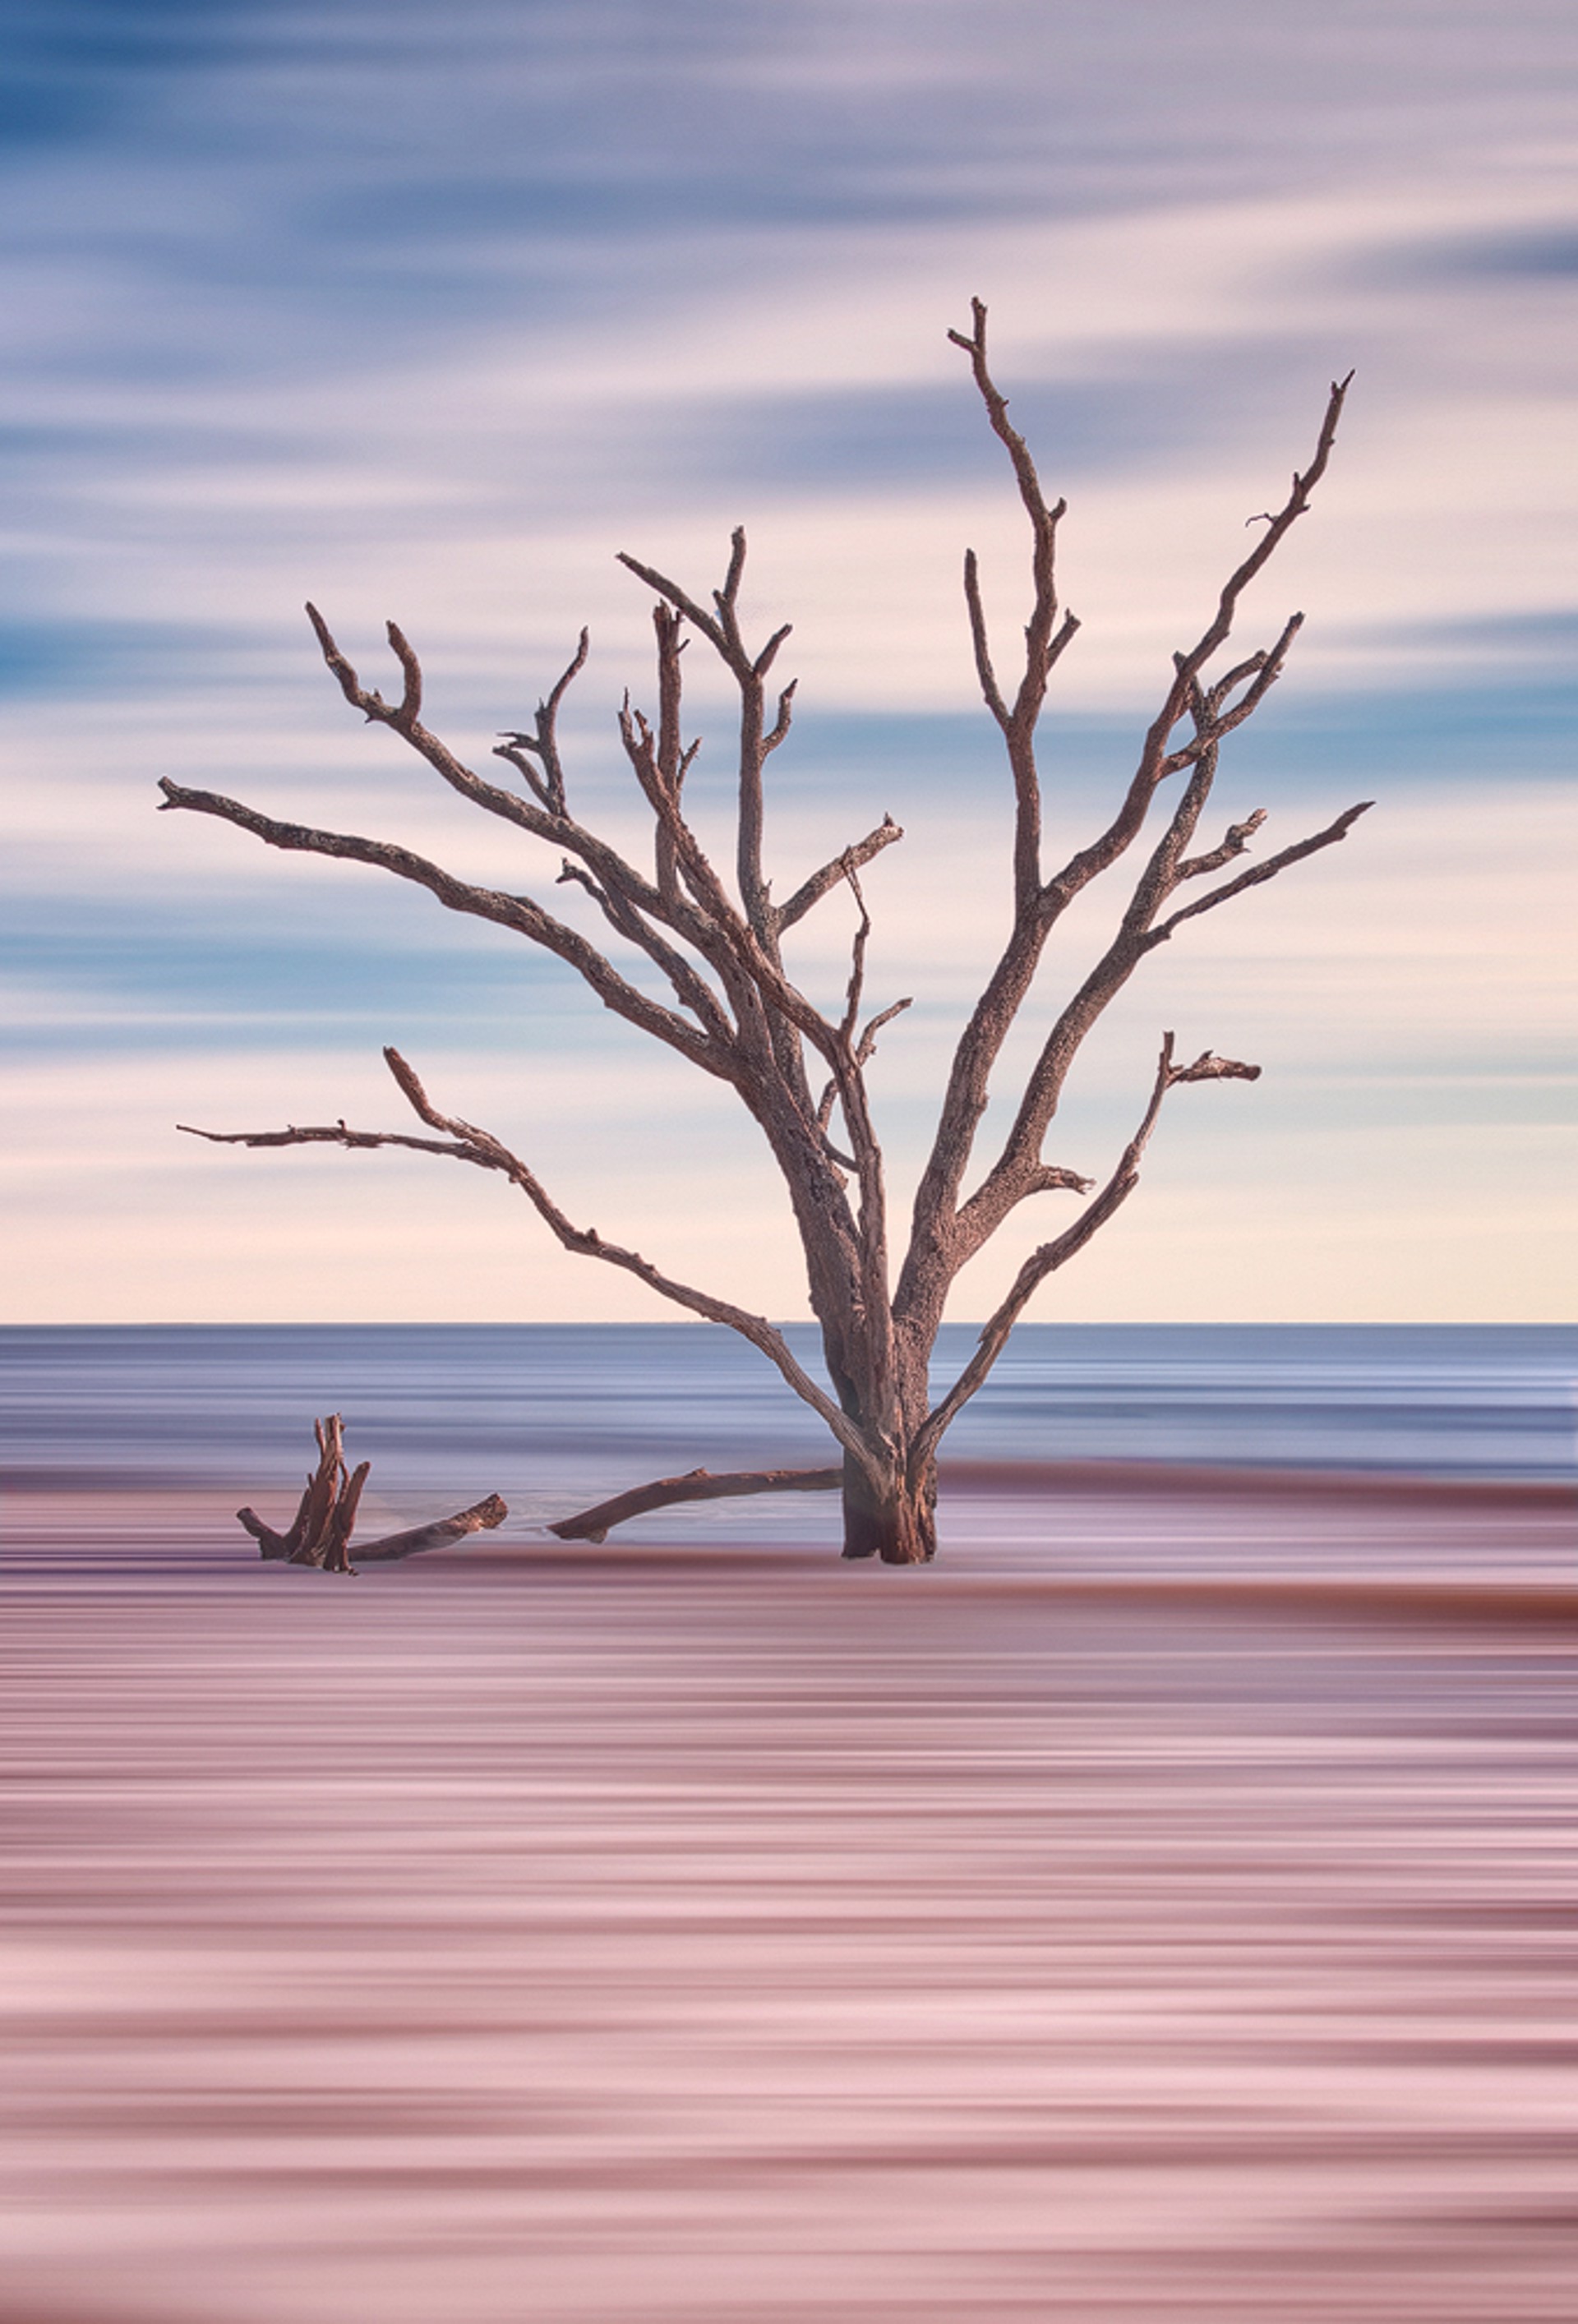 Solitary Driftwood Tree In Botany Bay by Barry Vangrov